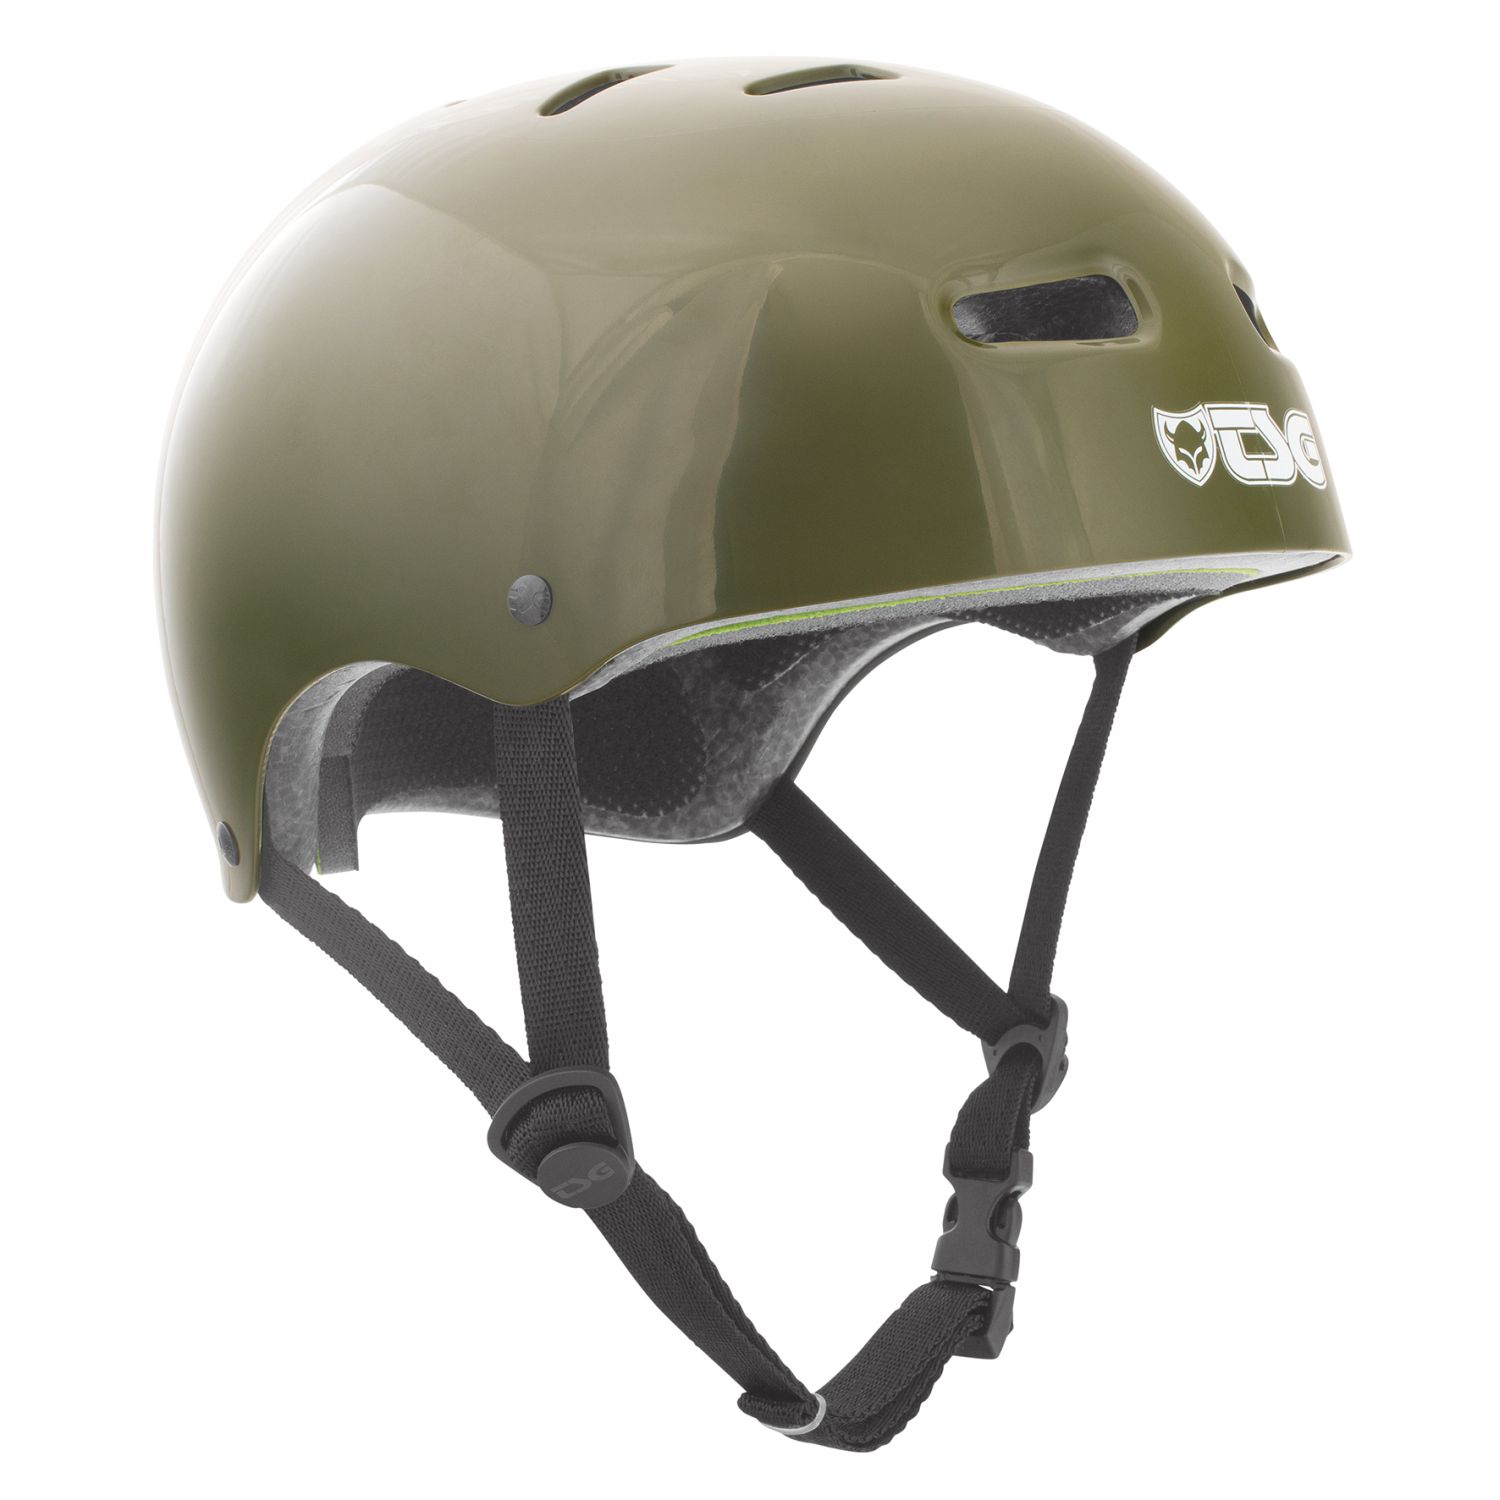 TSG Casco BMX/Dirt Skate/BMX Injected Color - Injected Olive